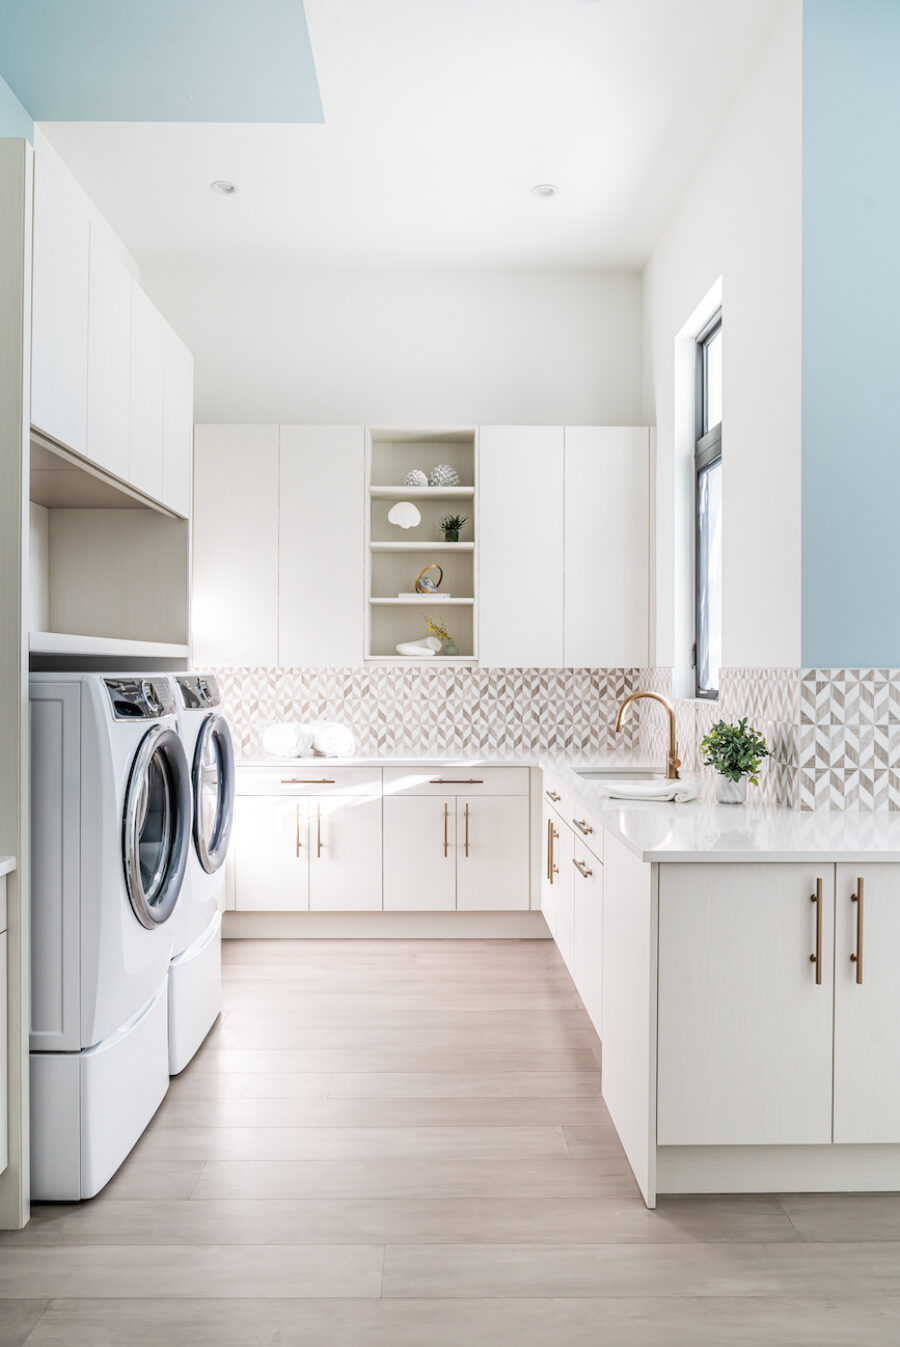 laundry-room-interior-design-counterspace-cabinetry